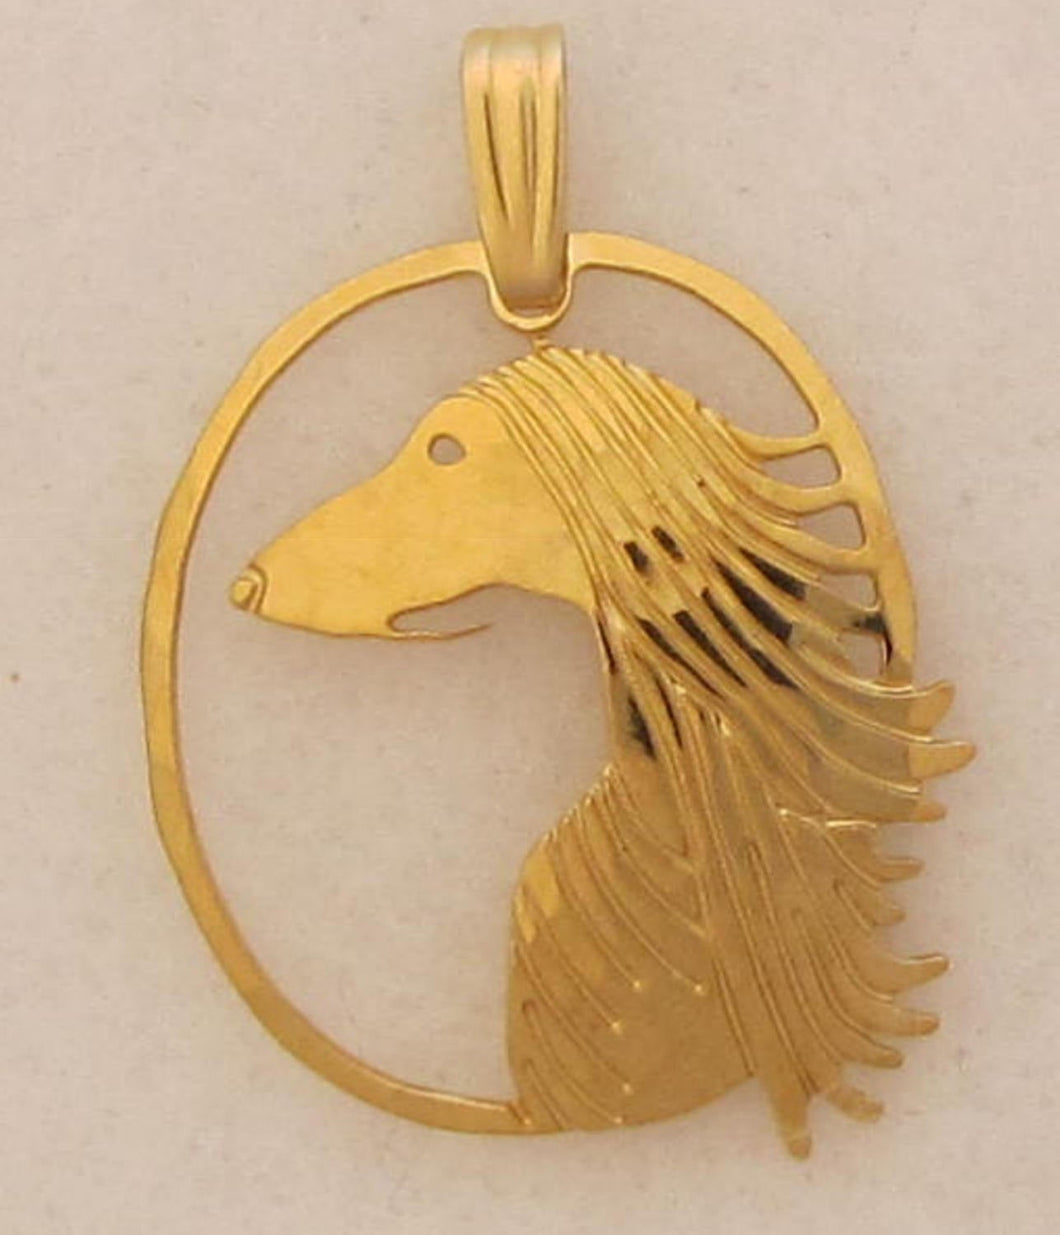 Afghan Hound Head Pendant by Touchstone Dog Designs // Afghan Hound Jewelry // Dog Breed Jewelry